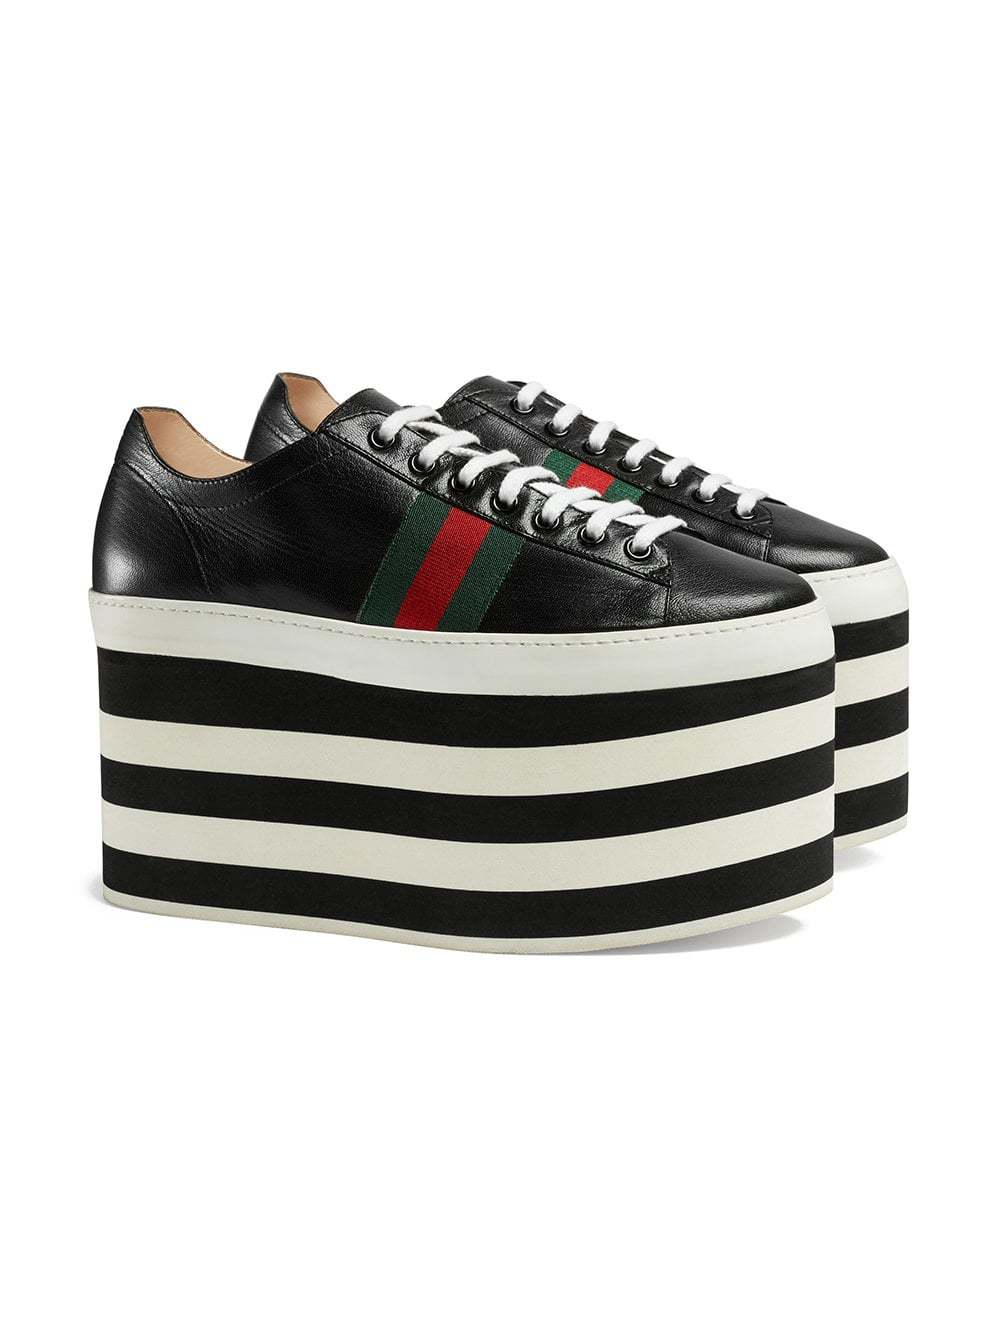 gucci leather platform sneakers